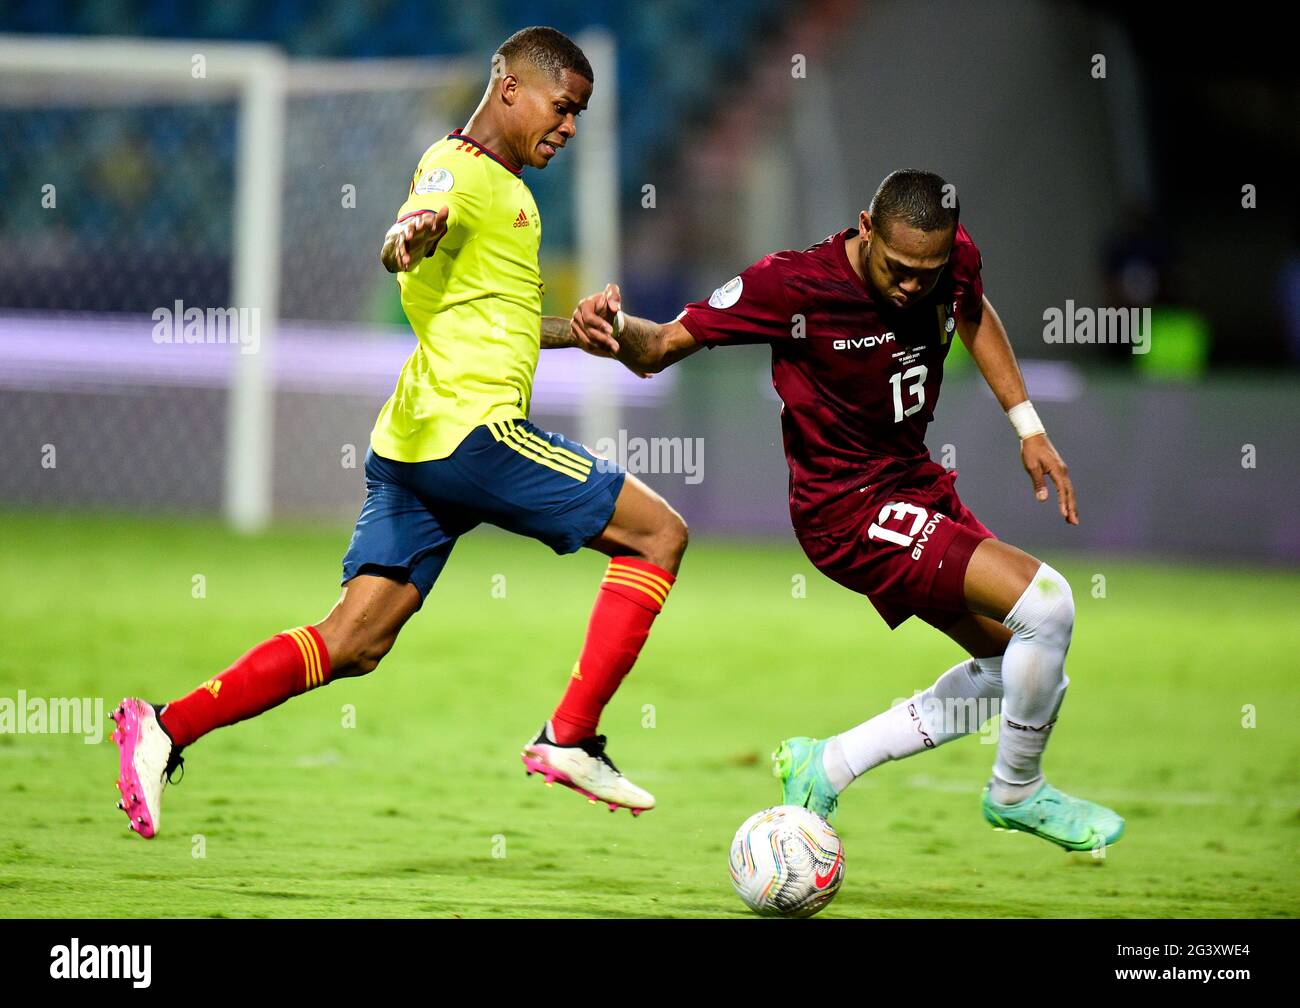 Goiania Brazil June 17 Jose Martinez Of Venezuela Competes For The Ball With Wilmar Barrios Of Colombia During The Match Between Colombia And Venezuela As Part Of Conmebol Copa America Brazil